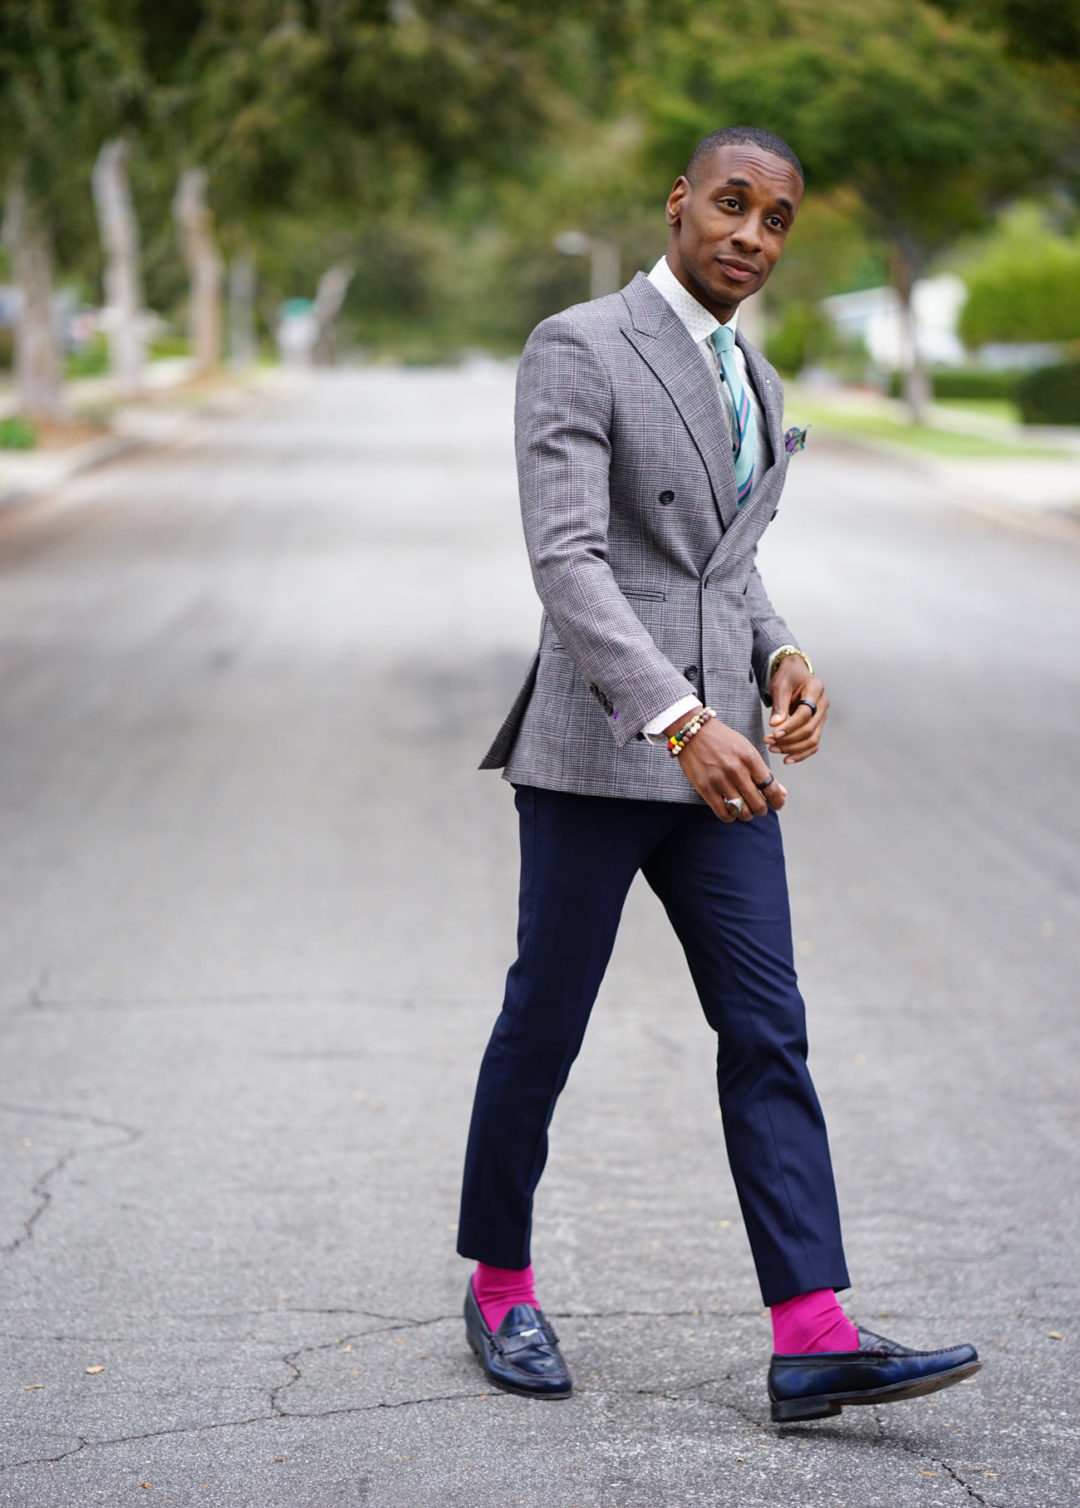 HOW TO WEAR PINK SOCKS FOR A POP OF COLOR – Norris Danta Ford